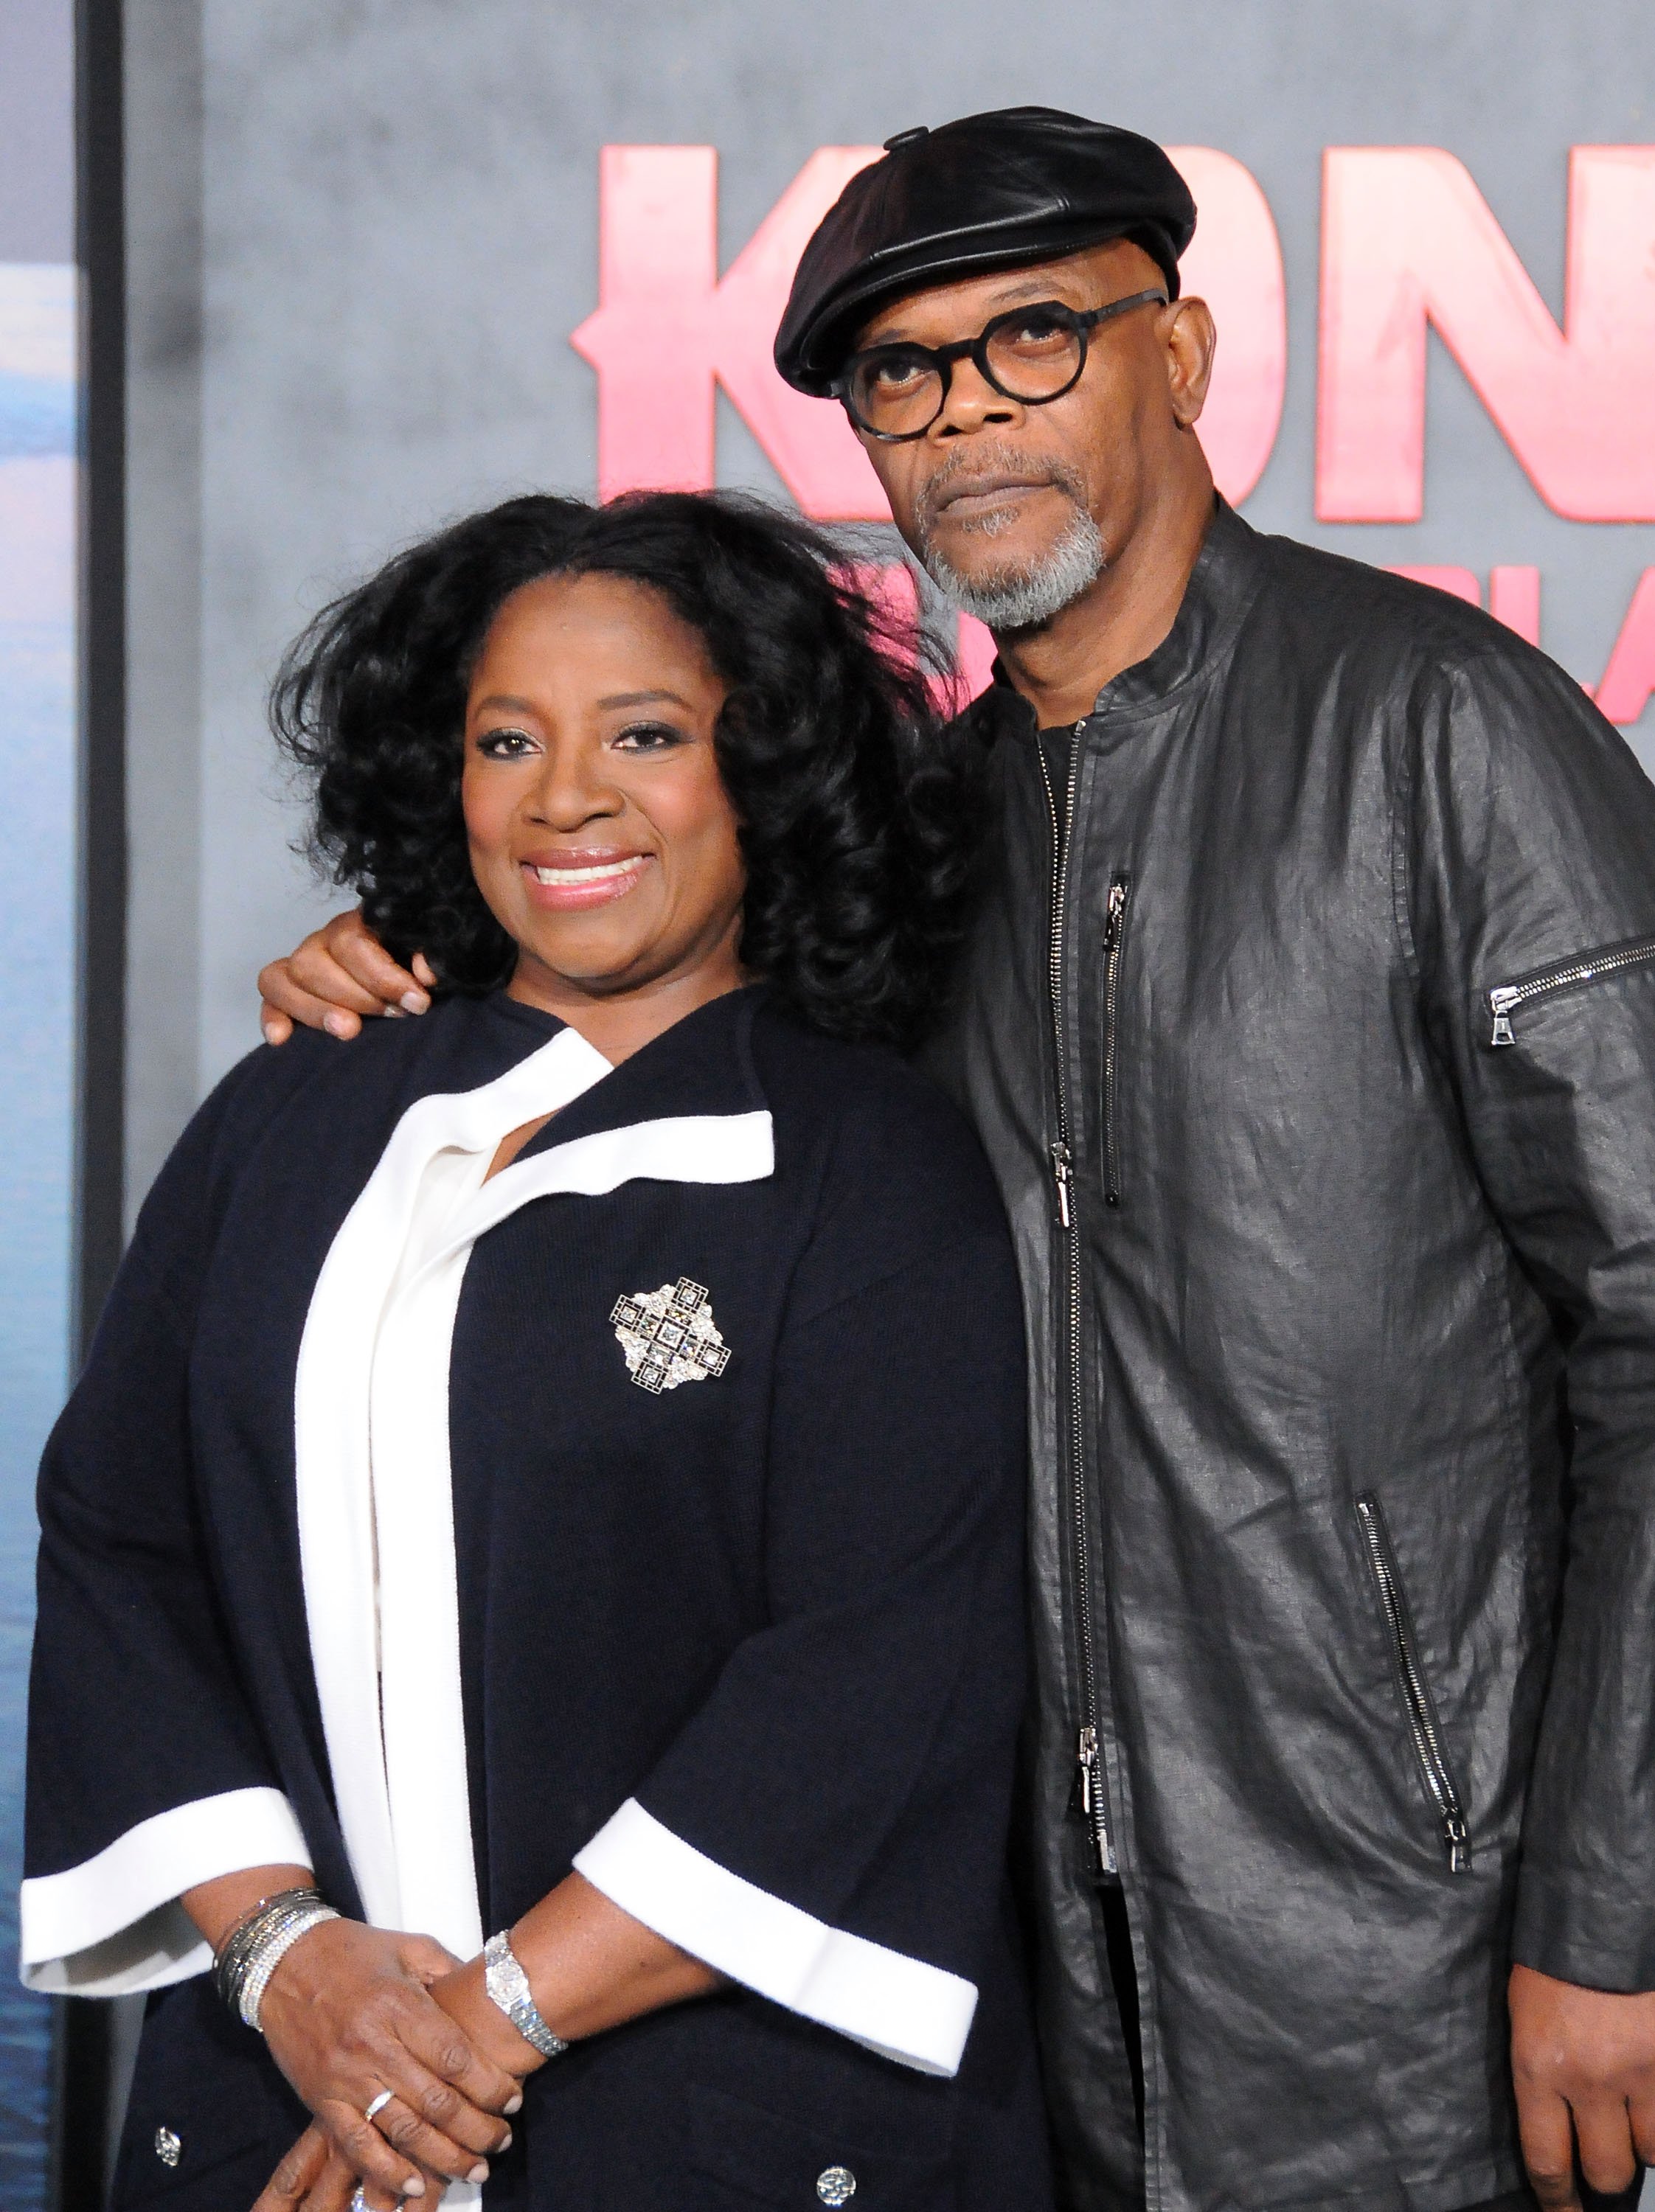 Samuel L. Jackson and wife LaTanya Richardson arrive for the Premiere of Warner Bros. Pictures' 'Kong: Skull Island' at Dolby Theatre on March 8, 2017 in Hollywood, California. | Source: Getty Images.